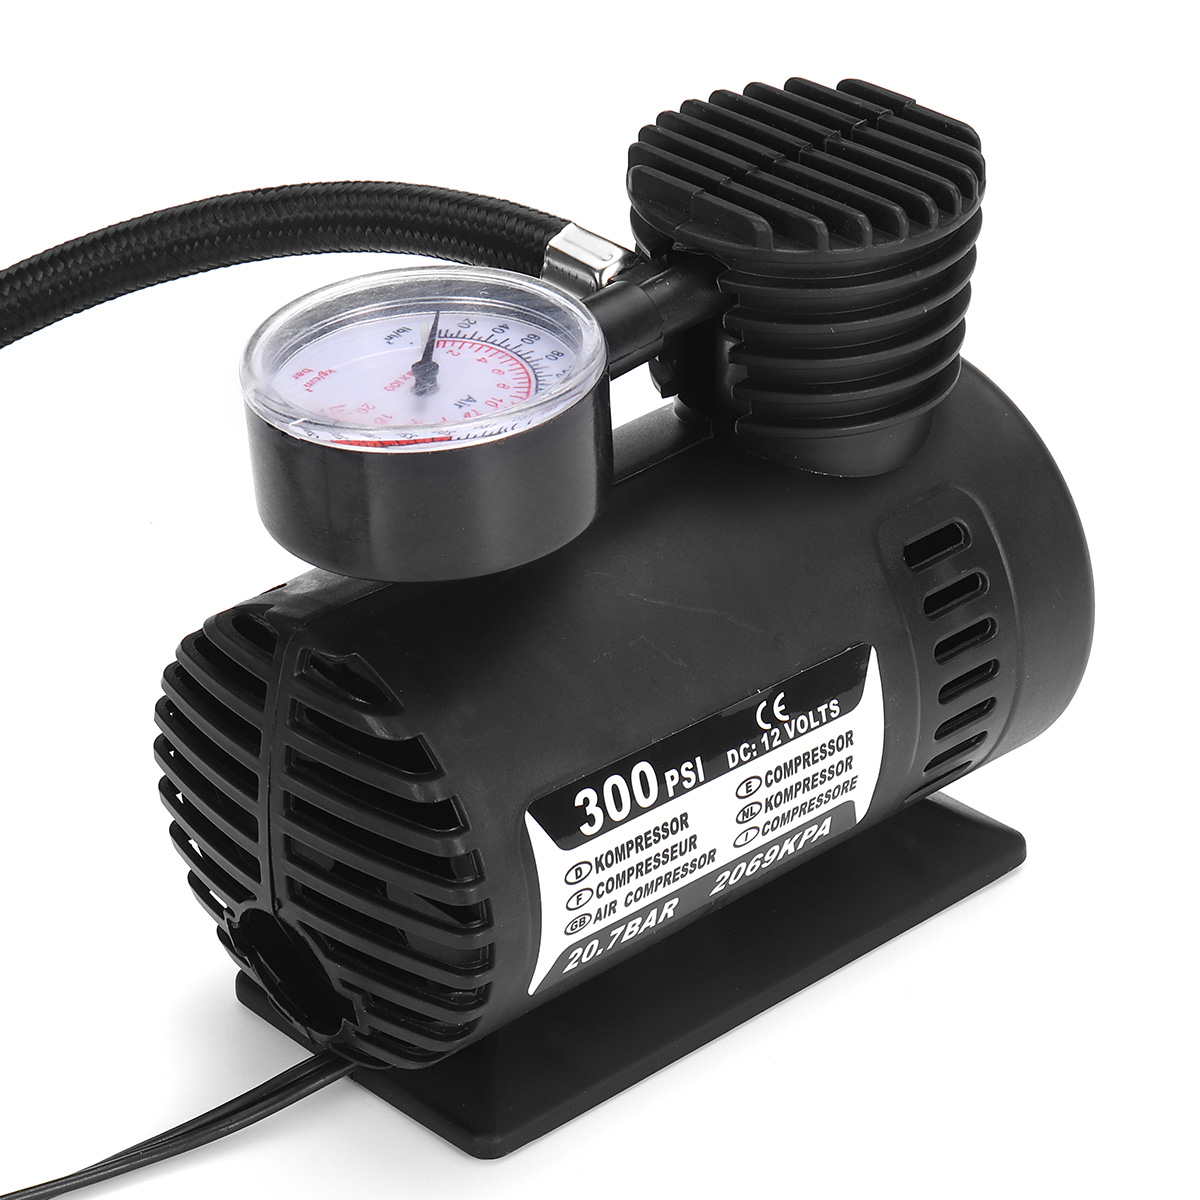 DC-12V-300PSI-Car-Air-Compressor-Portable-Tire-Inflator-Air-Pump-For-Motorcycle-Car-Auto-Bicycle-1715750-9